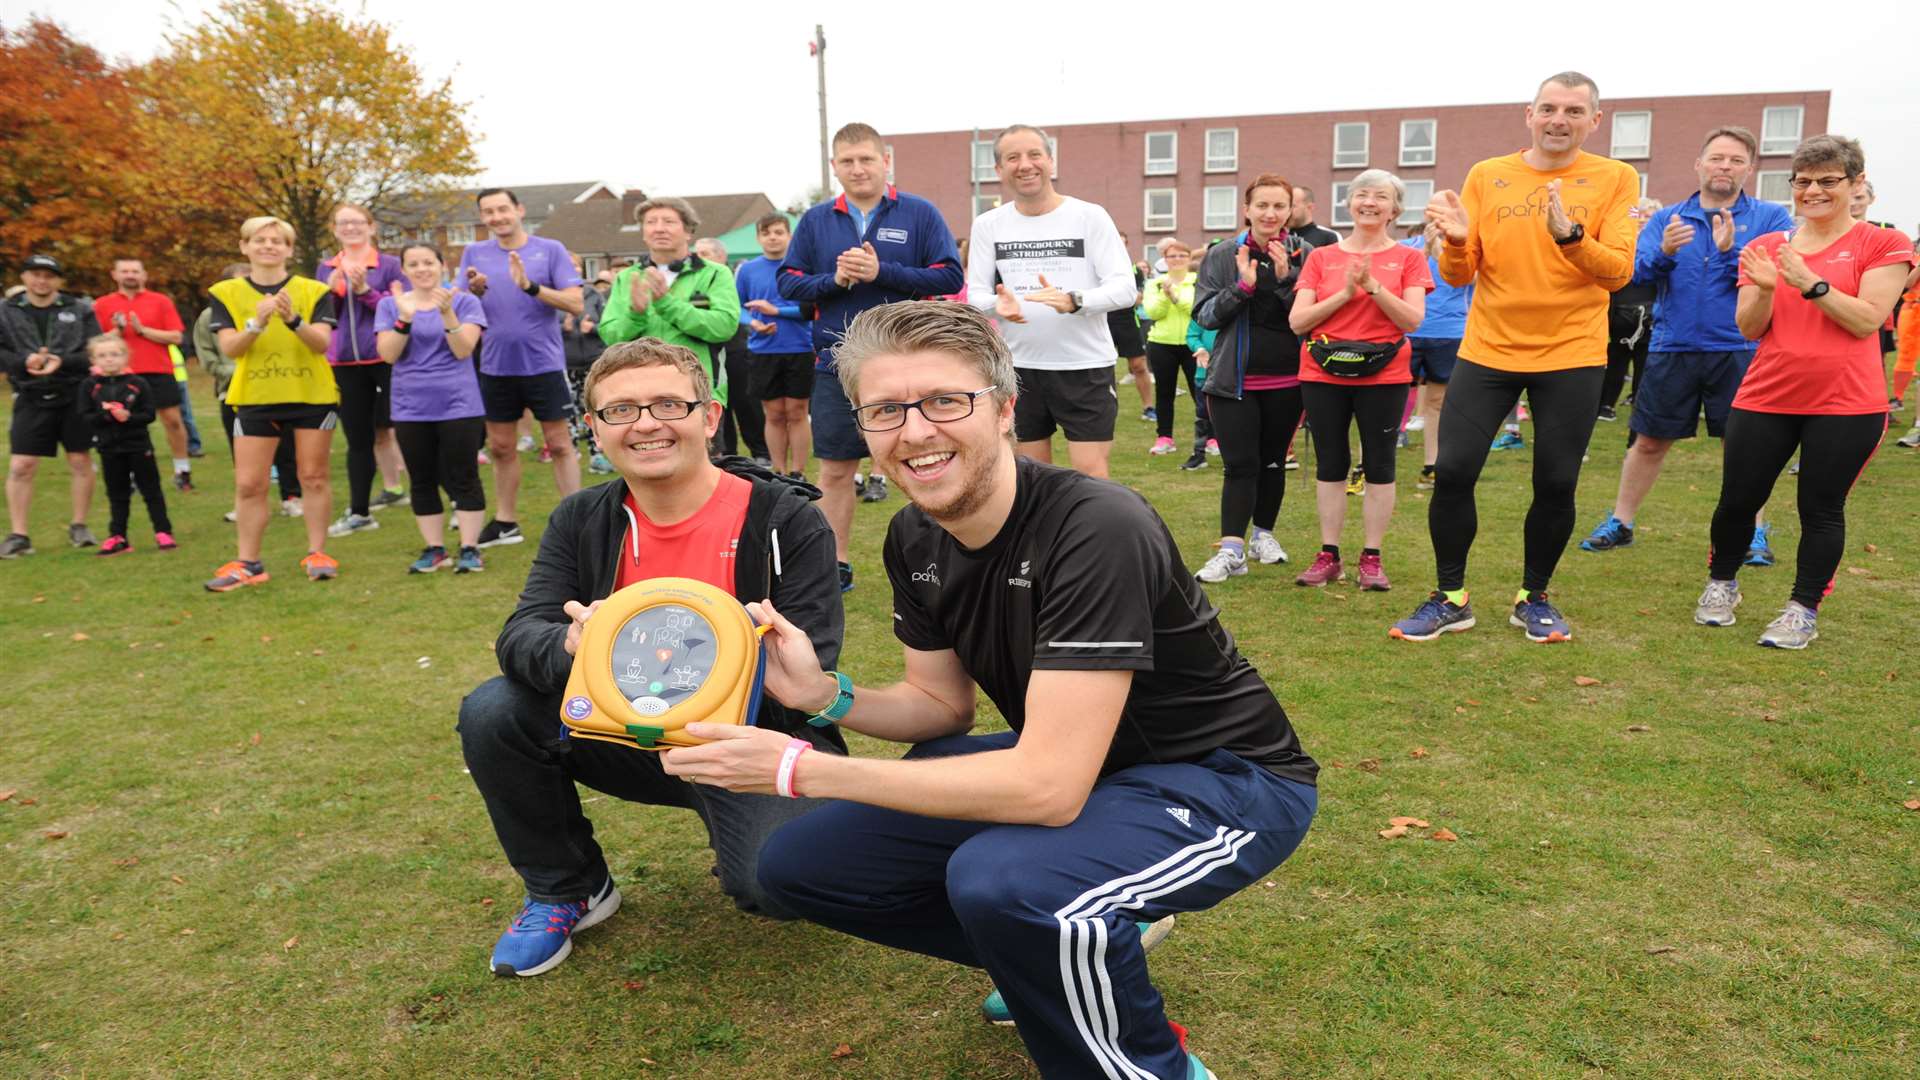 Chris Gedge's donation has helped Medway parkrun